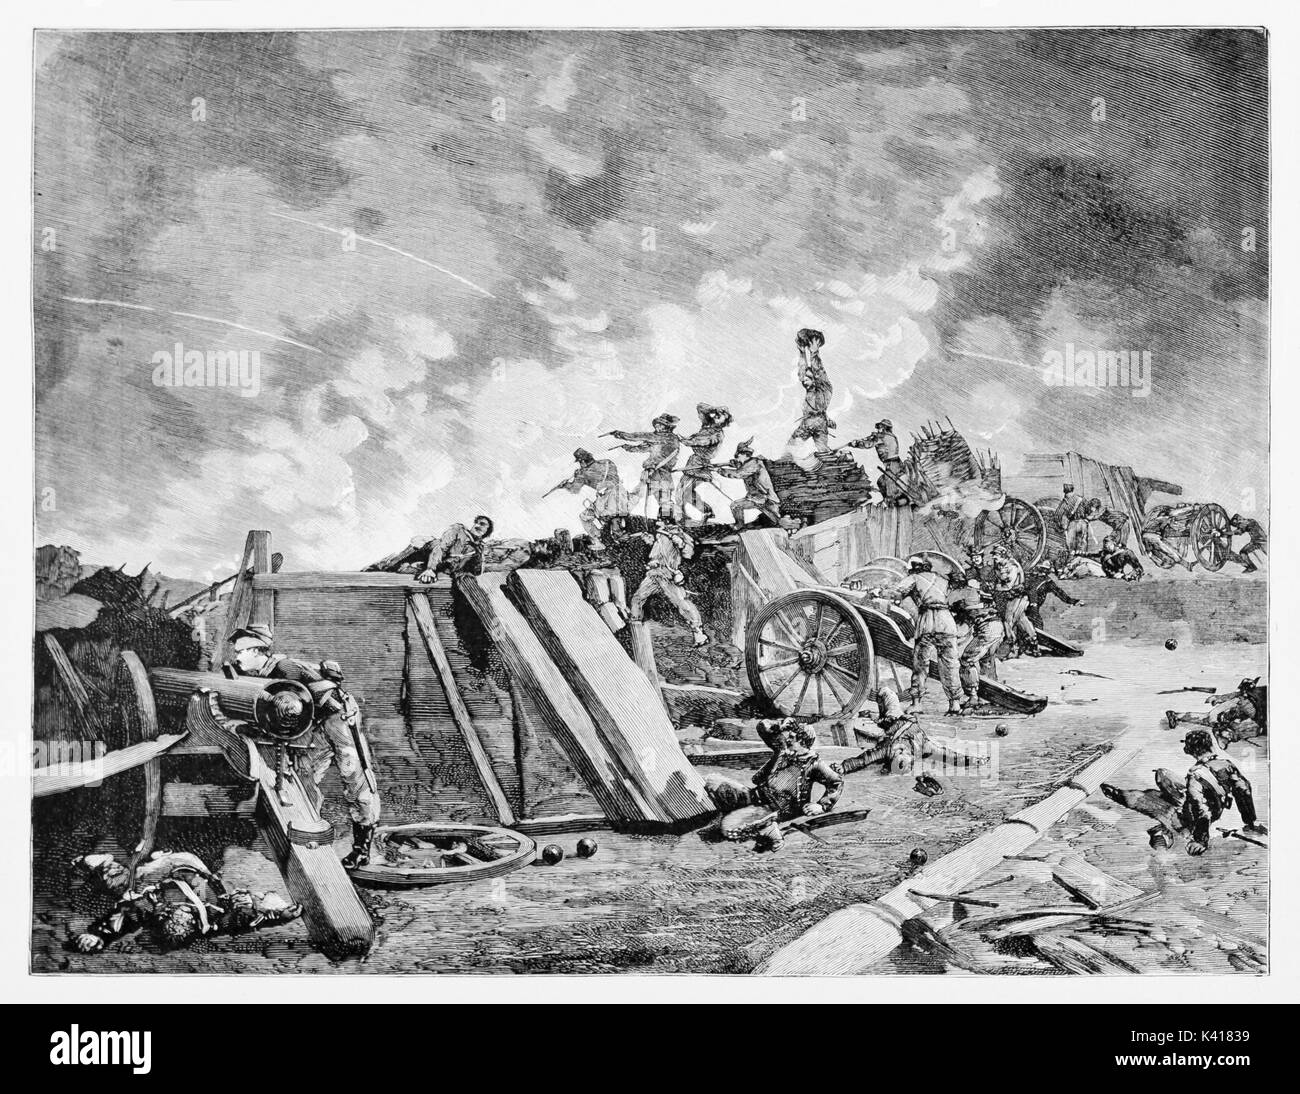 Ancient war situation with soldiers fighting on a barricade. Roman artillery battery fighting against French army in Rome, 1849. By E. Matania published on Garibaldi e i Suoi Tempi Milan Italy 1884 Stock Photo